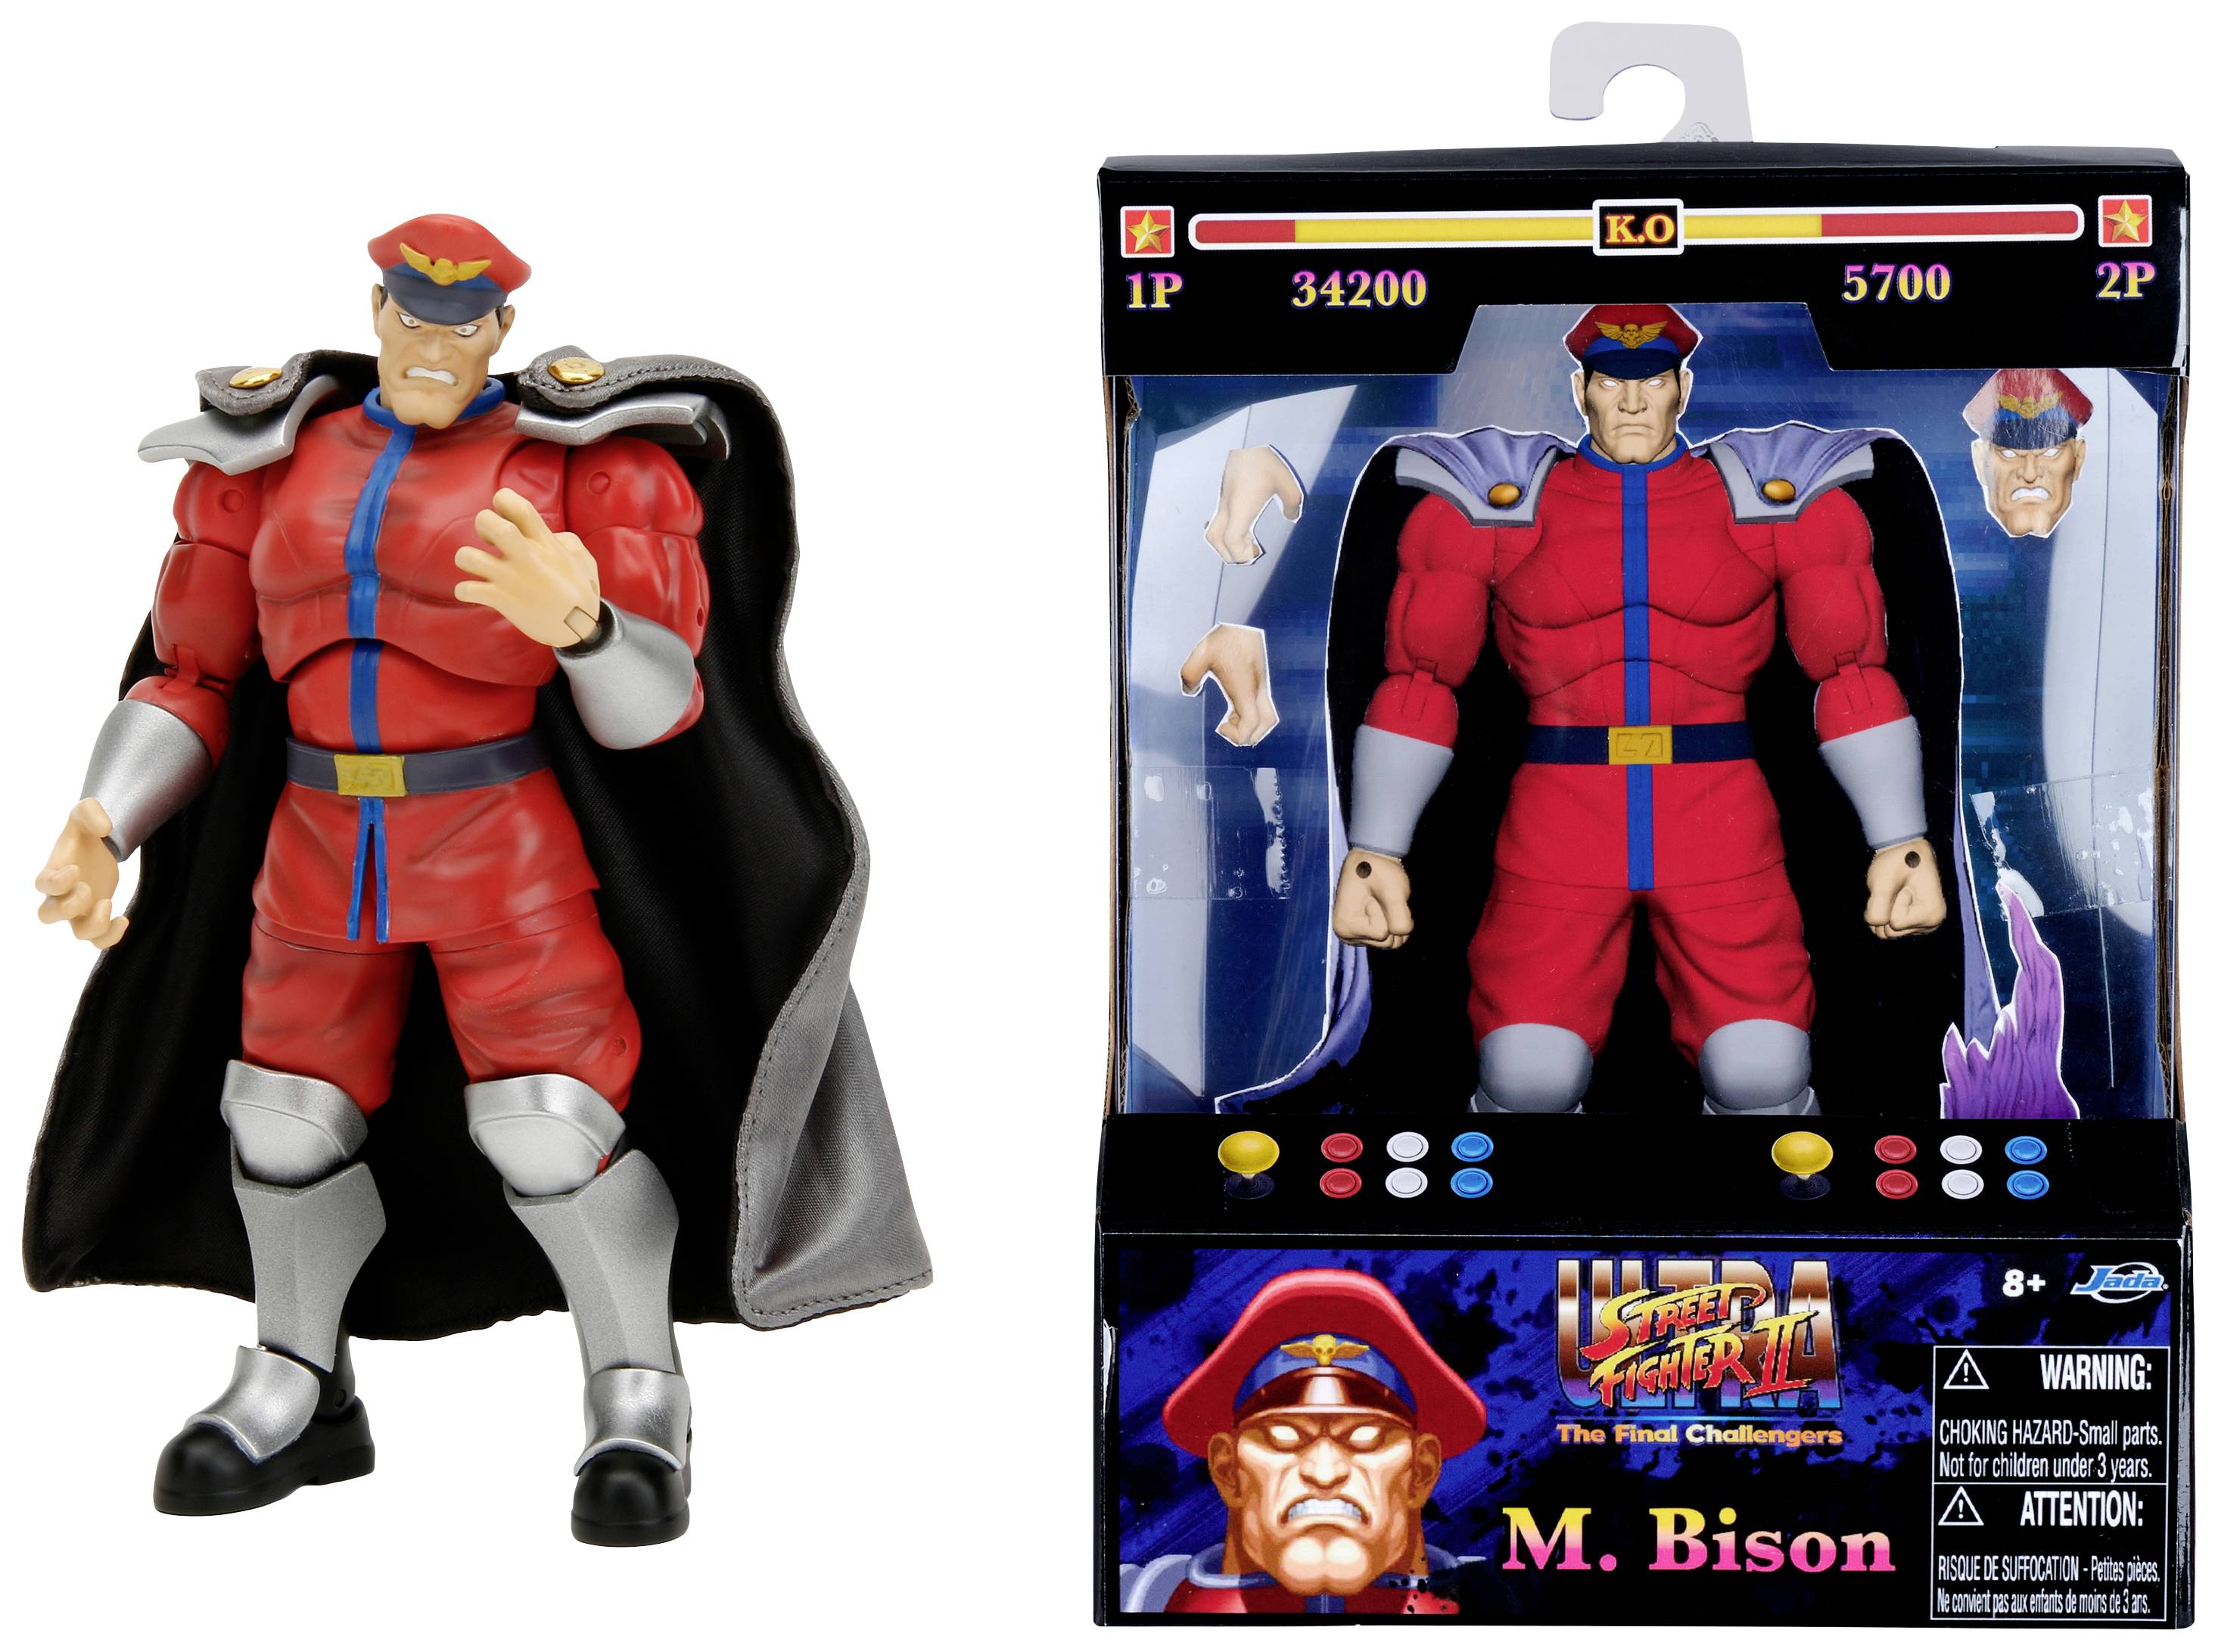 Jada Toys - Ultra Street Fighter II: The Final Challengers - 6" M. Bison - Marvelous Toys